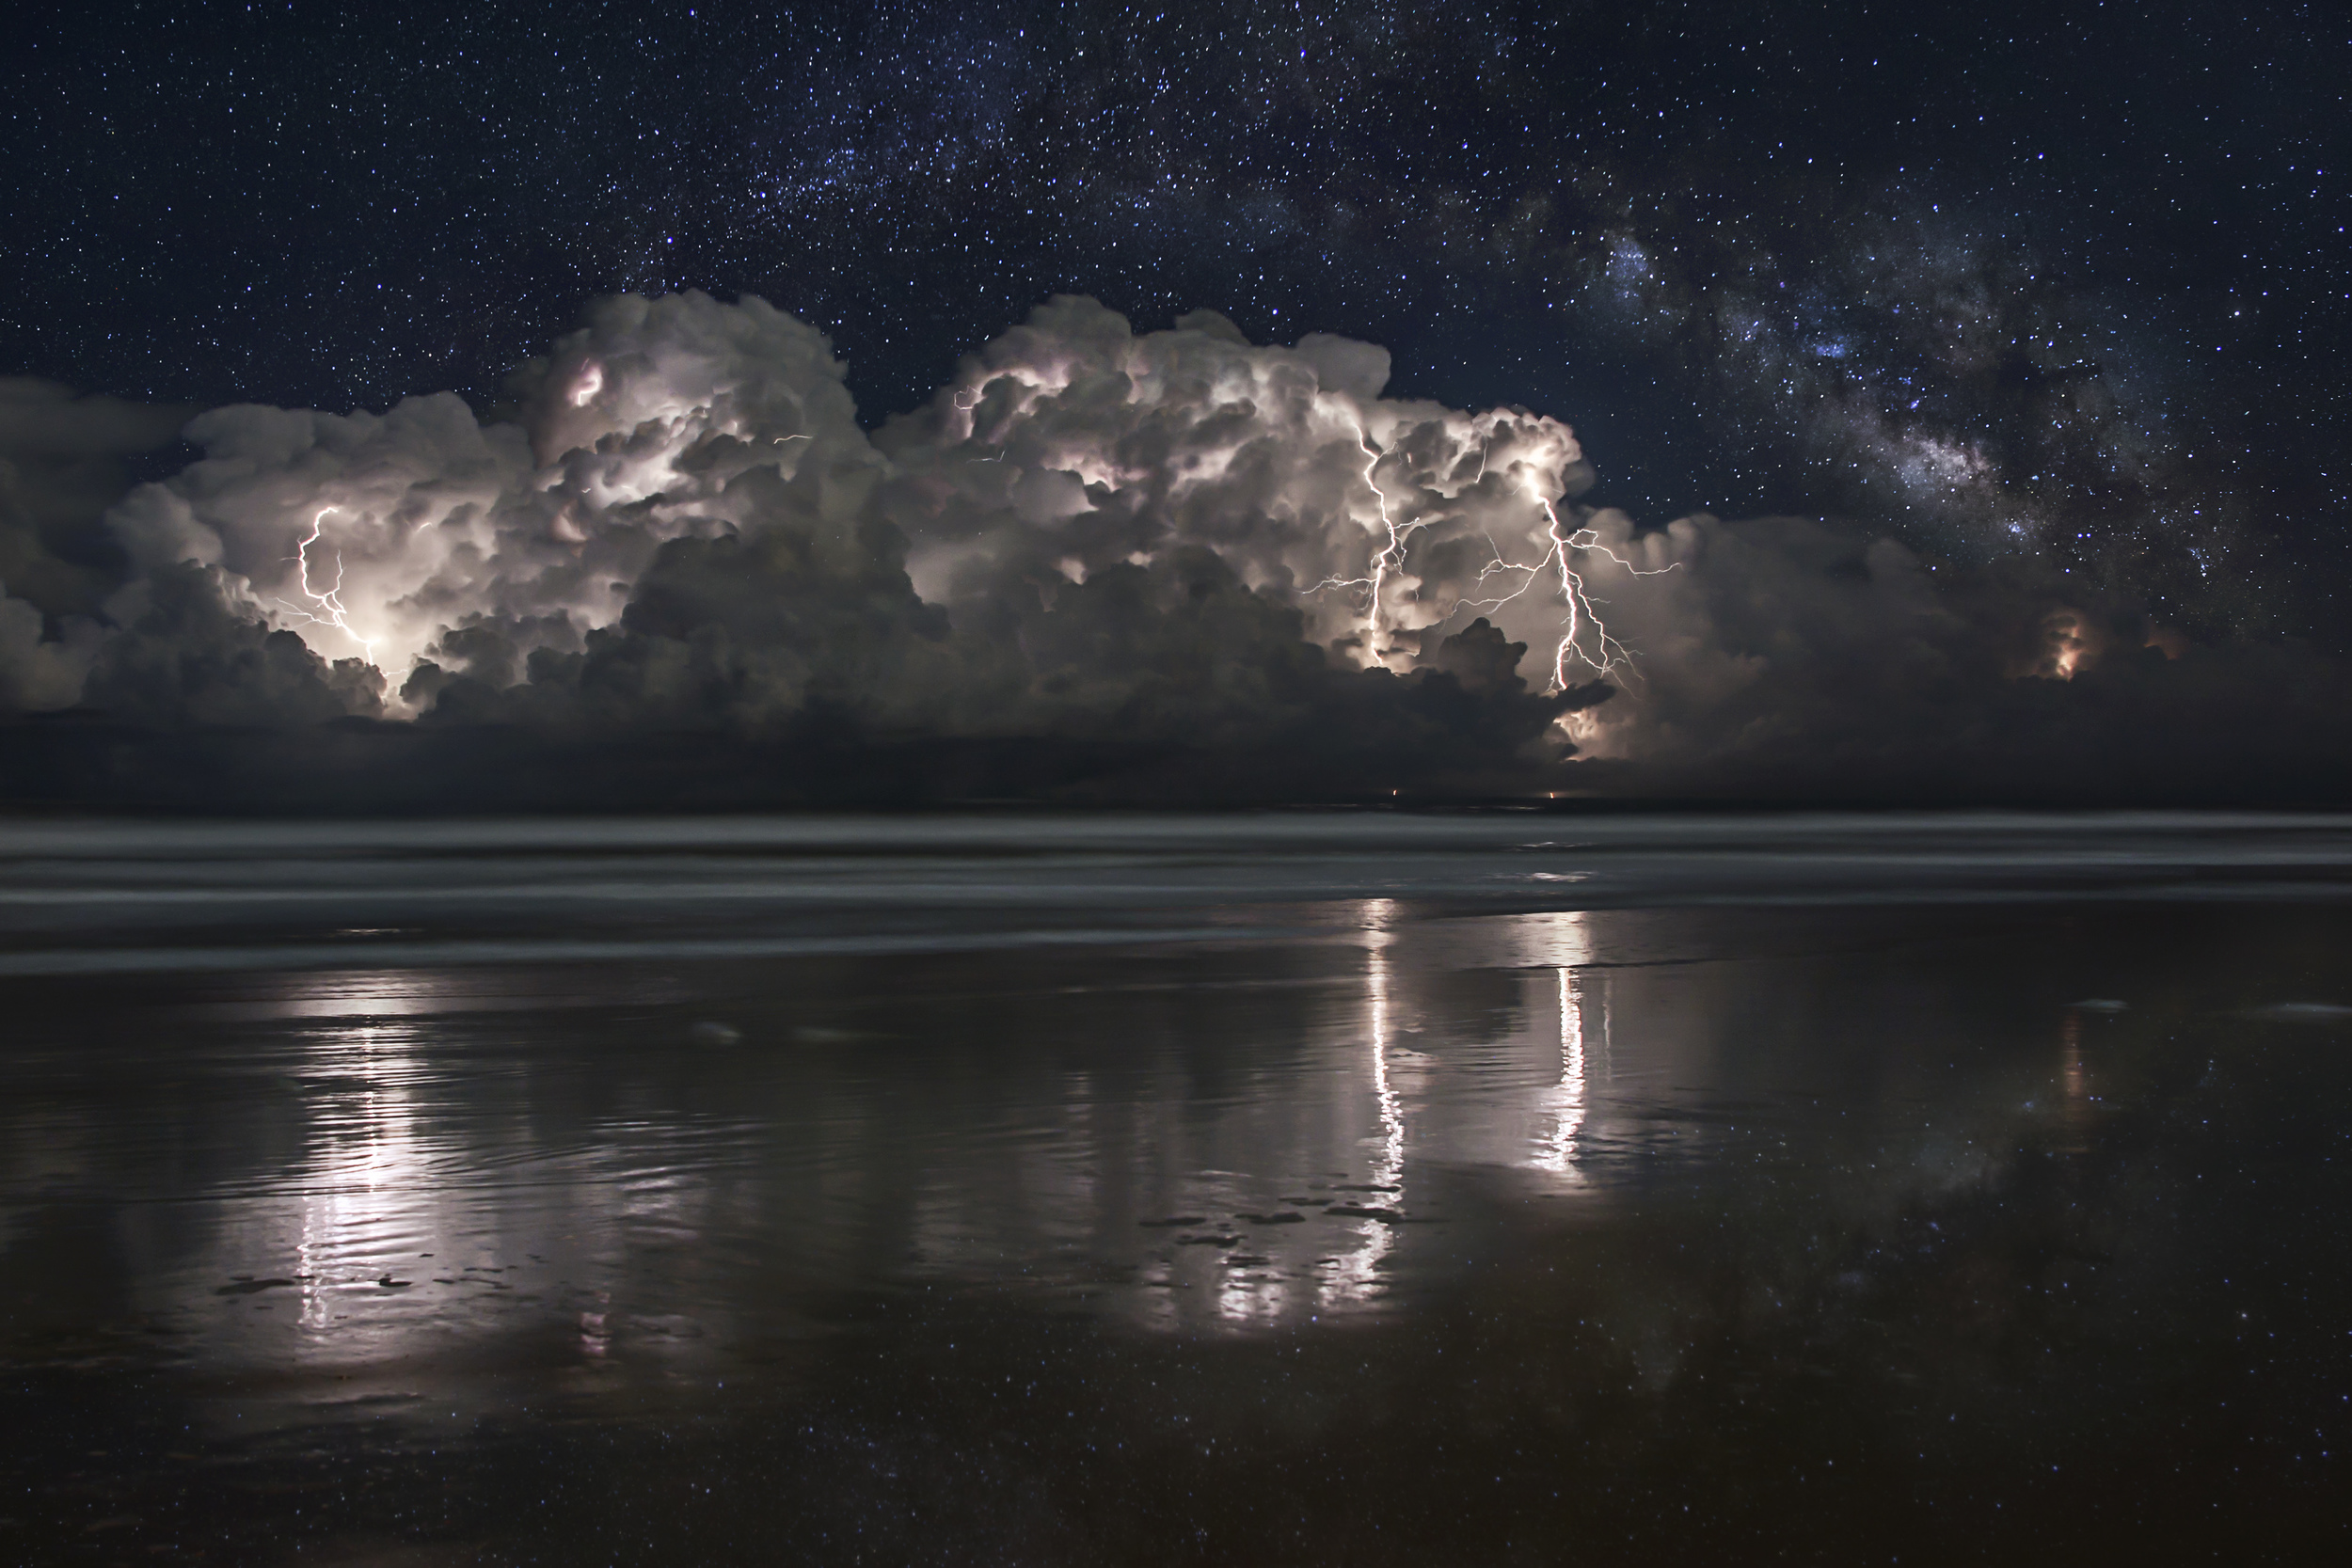  Cluster of storms off the coast of Ormond Beach, Florida with the Milky Way composited behind them on October 11, 2012. 4 image stack for lightning. 8 image panorama for Milky Way.&nbsp; 